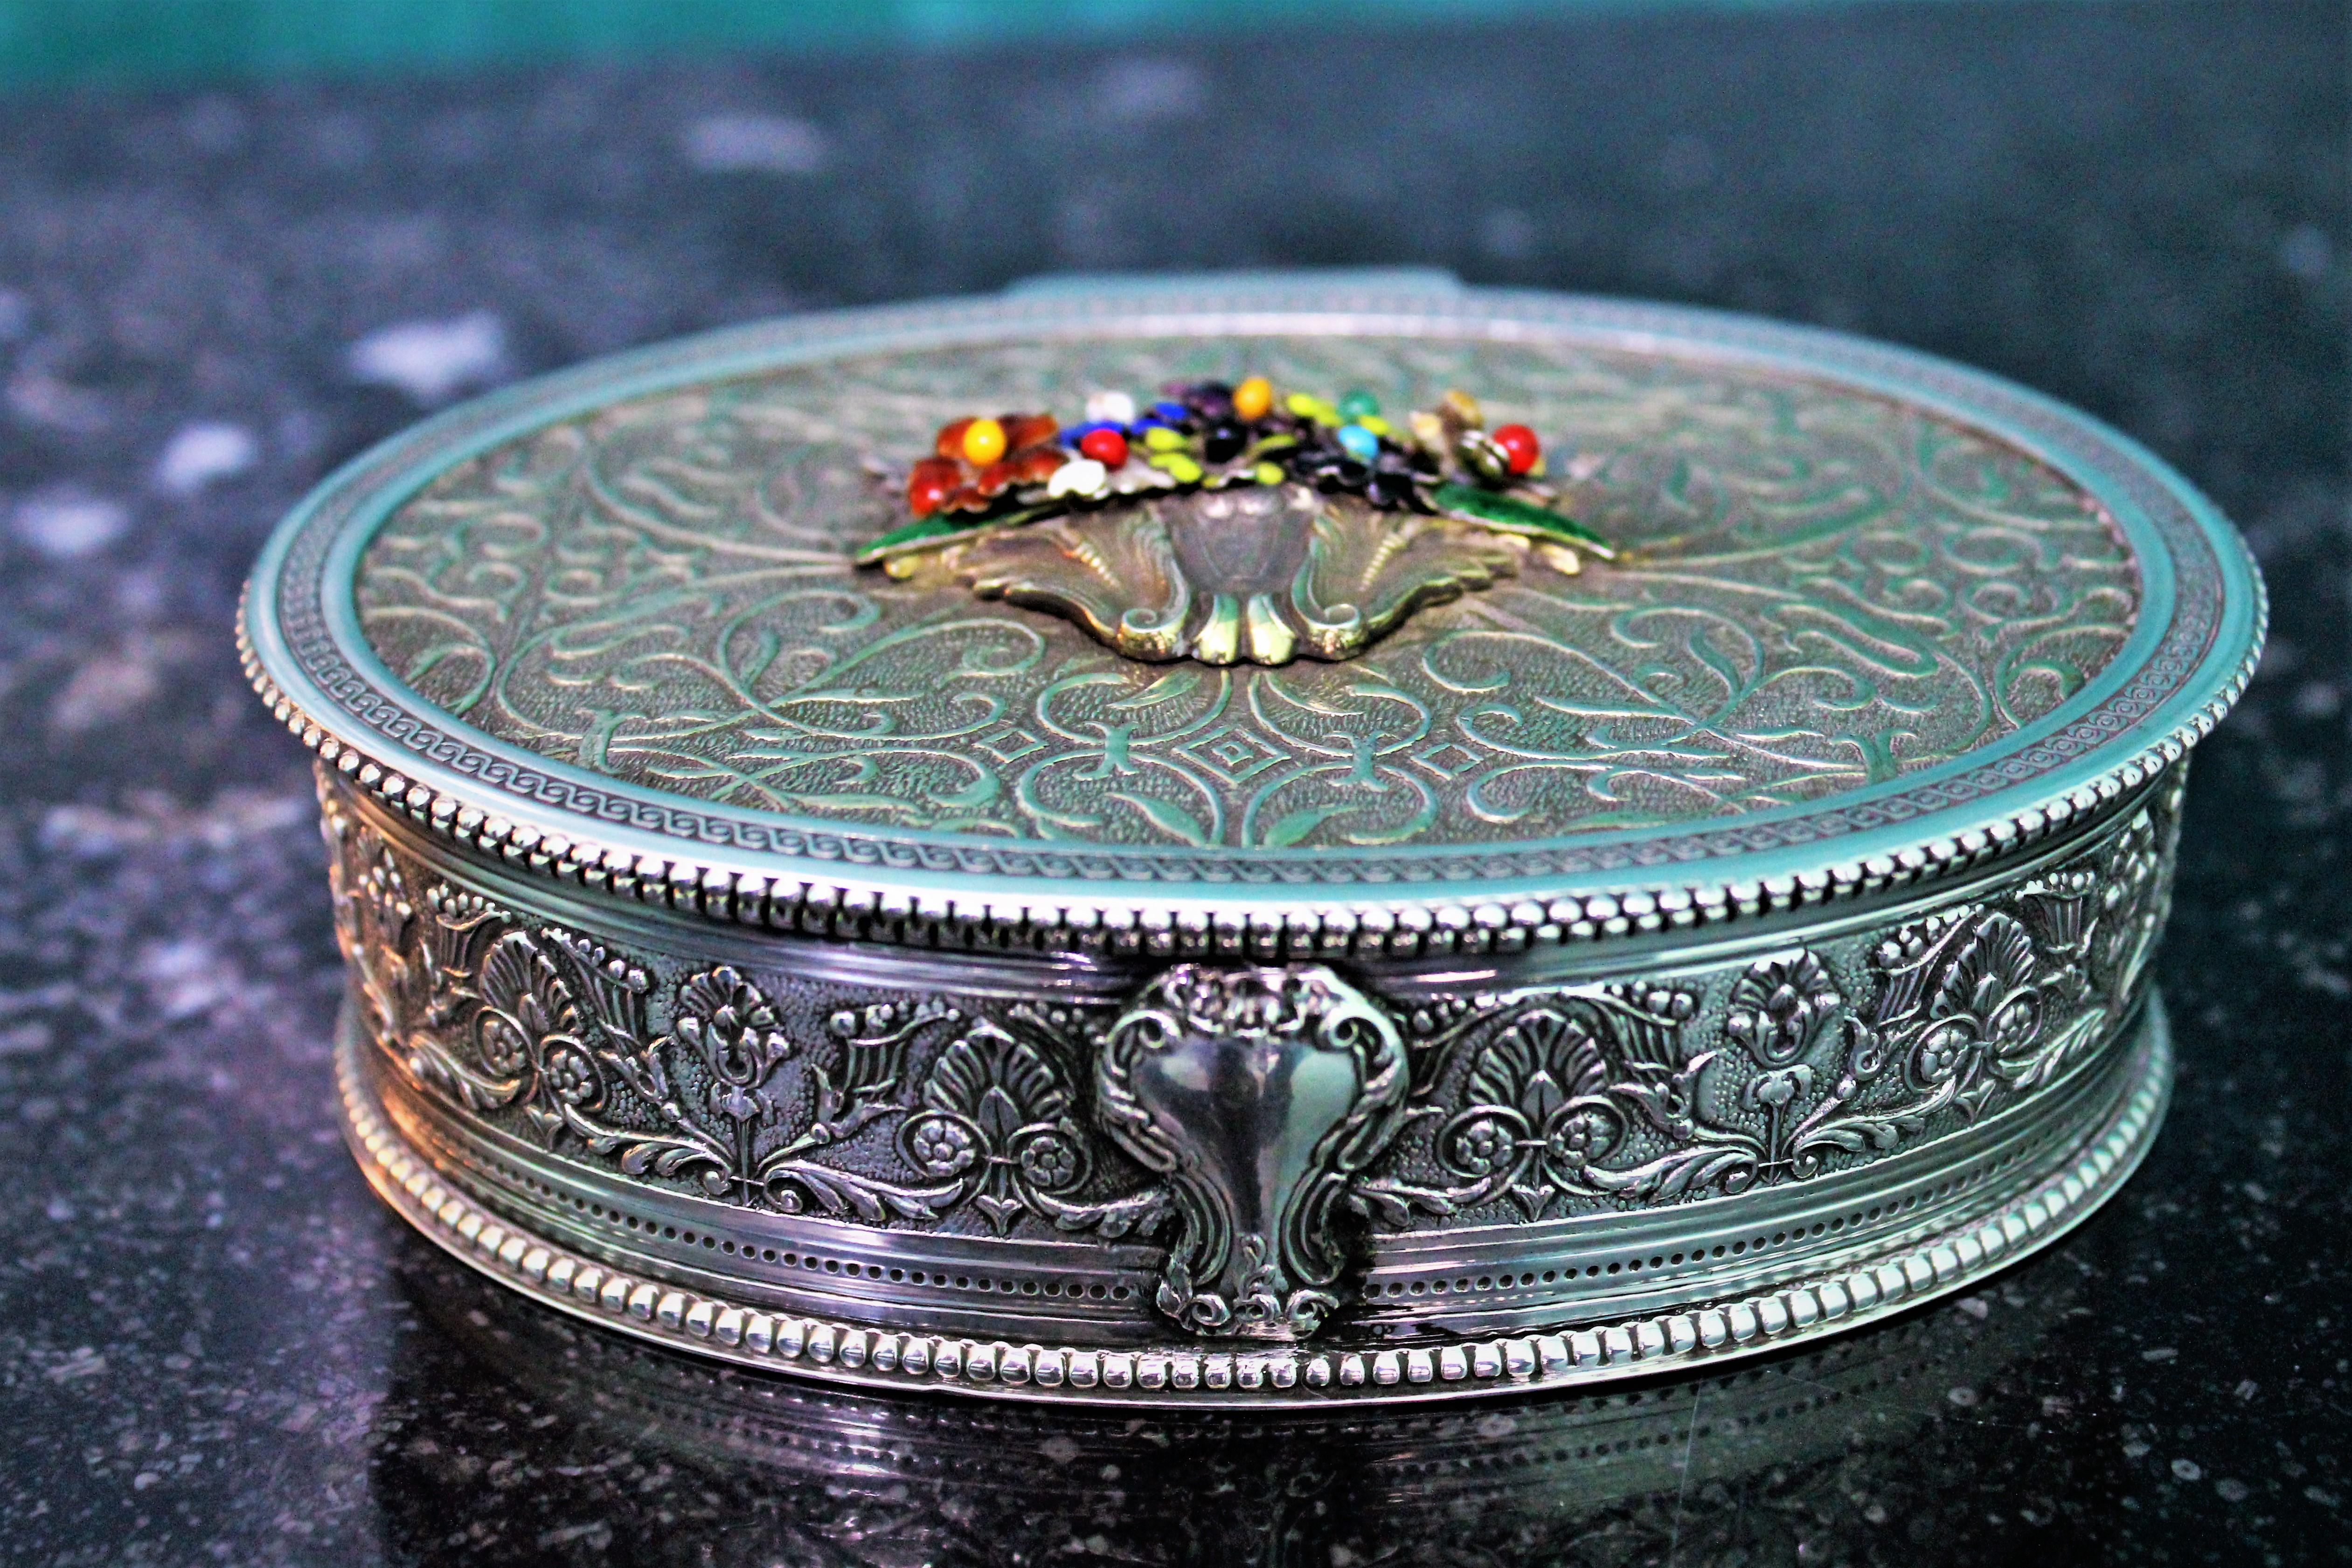 Wonderful decorative engraved silver box, realized by Enea Stefani, famous silversmith from Bologna during 1970s.
Oval shaped, engraved by hand and gilded in the inside. On the cover application of enameled silver flowers as finial.
Silver 800